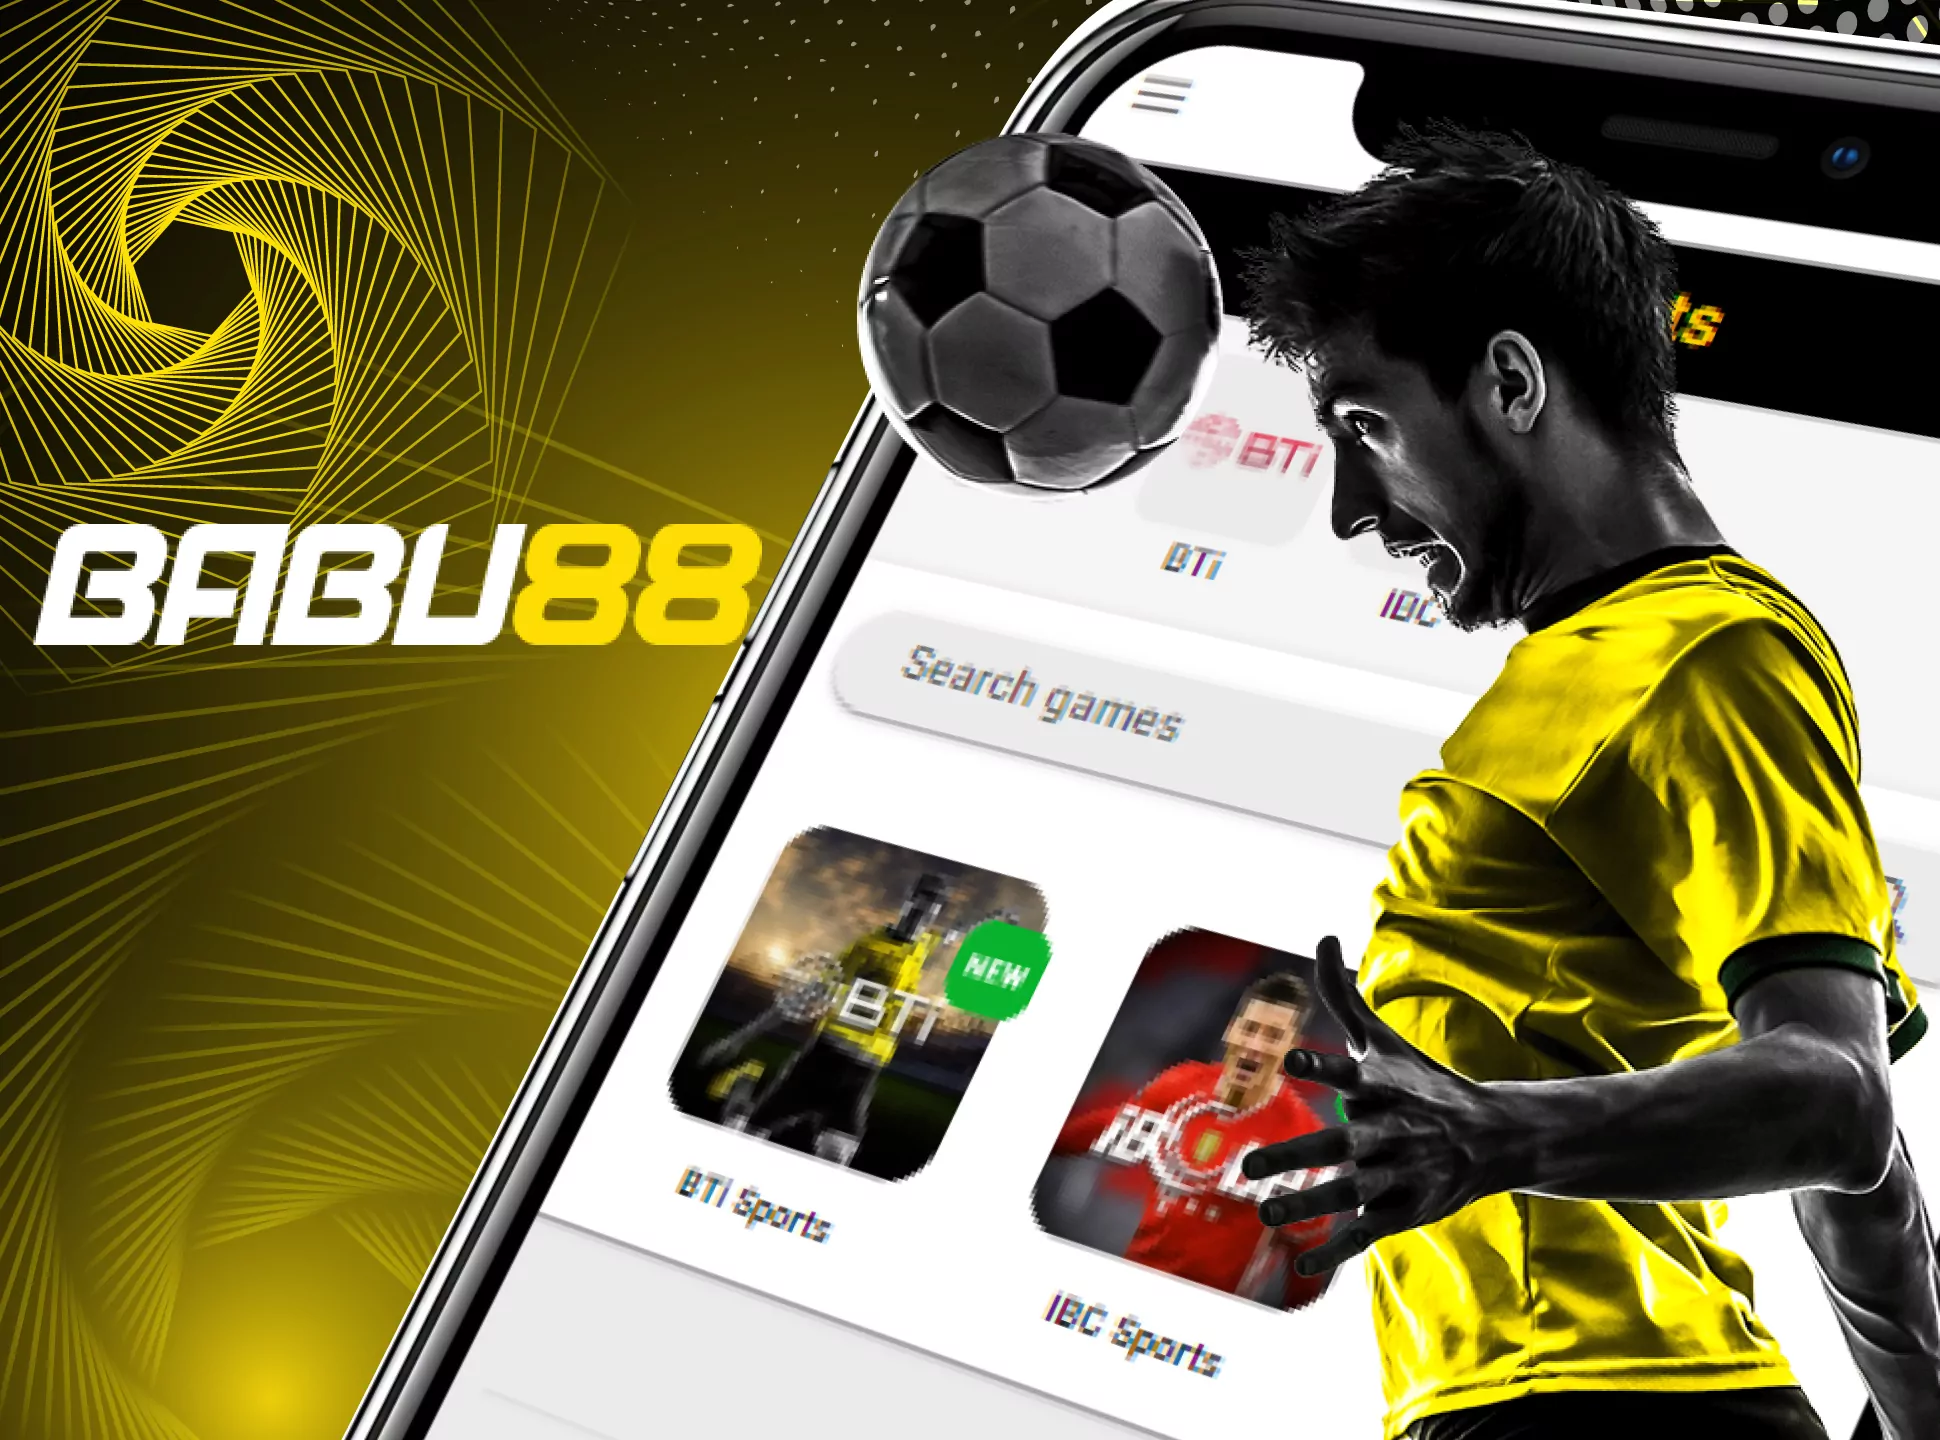 The Babu88 offers profitable odds for football betting.